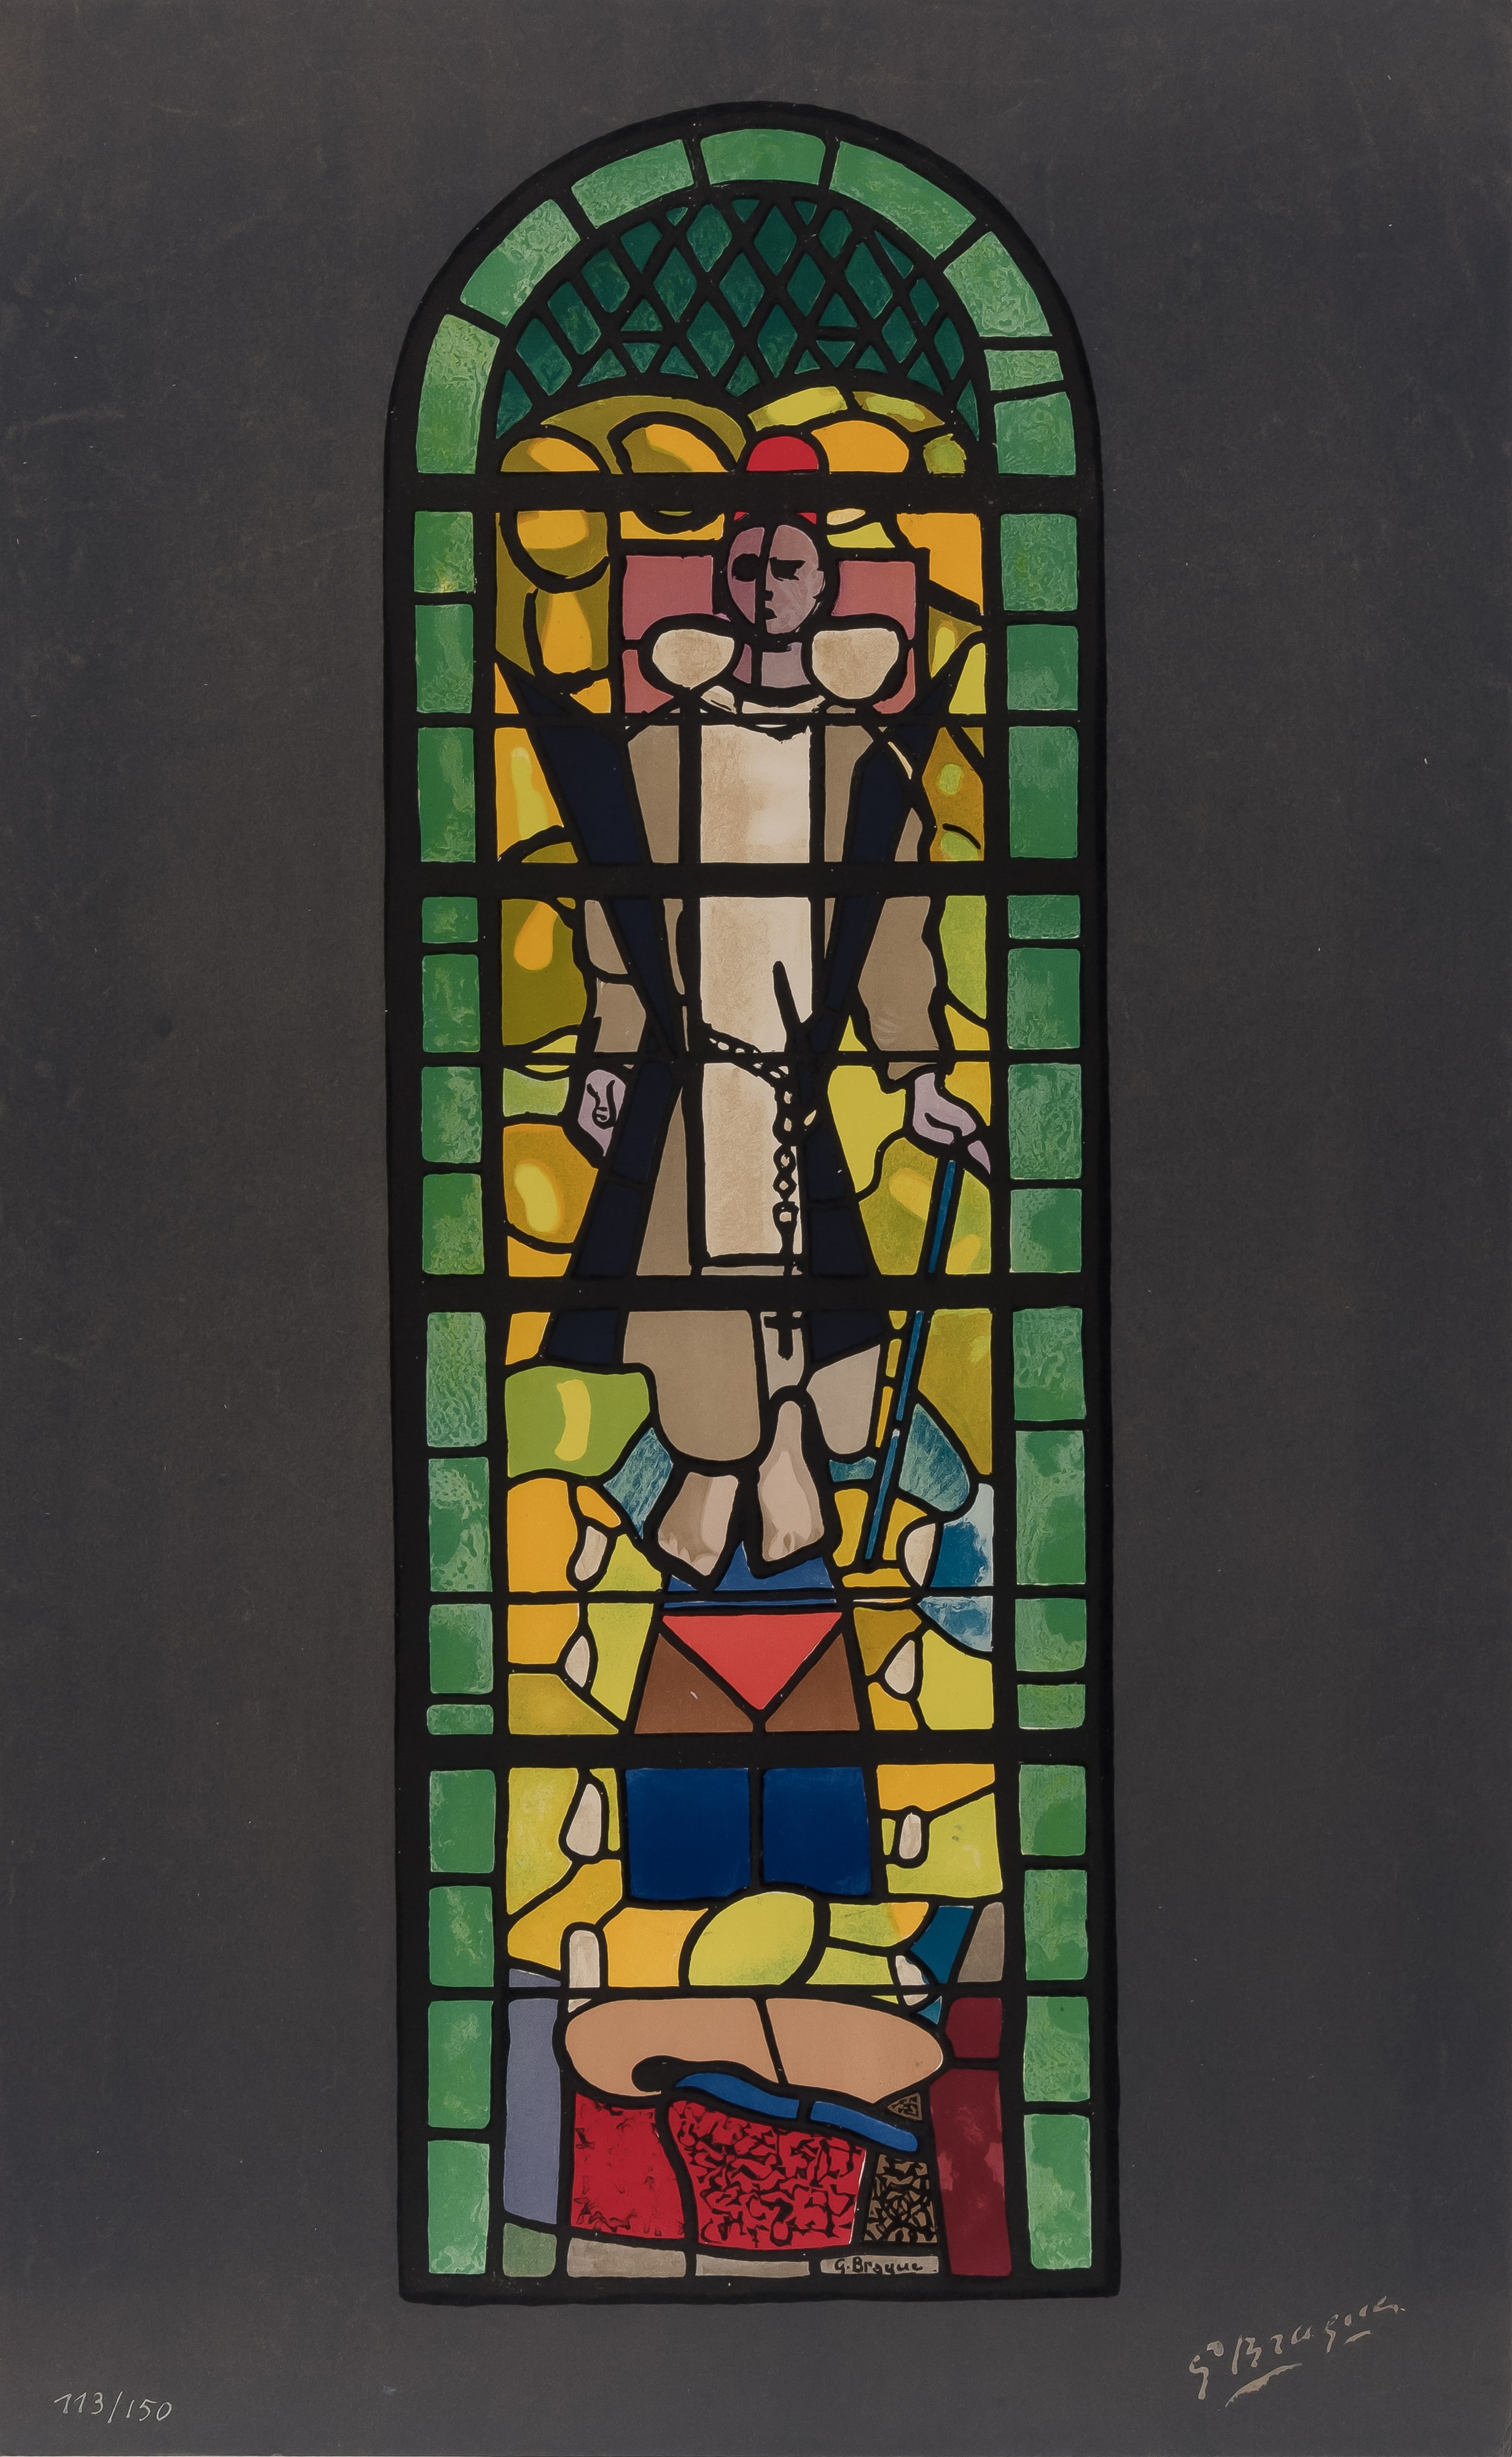 STAINED GLASS WINDOW AT CHURCH OF SAINT DOMINIQUE, VARENGEVILLE by Georges Braque, 1960